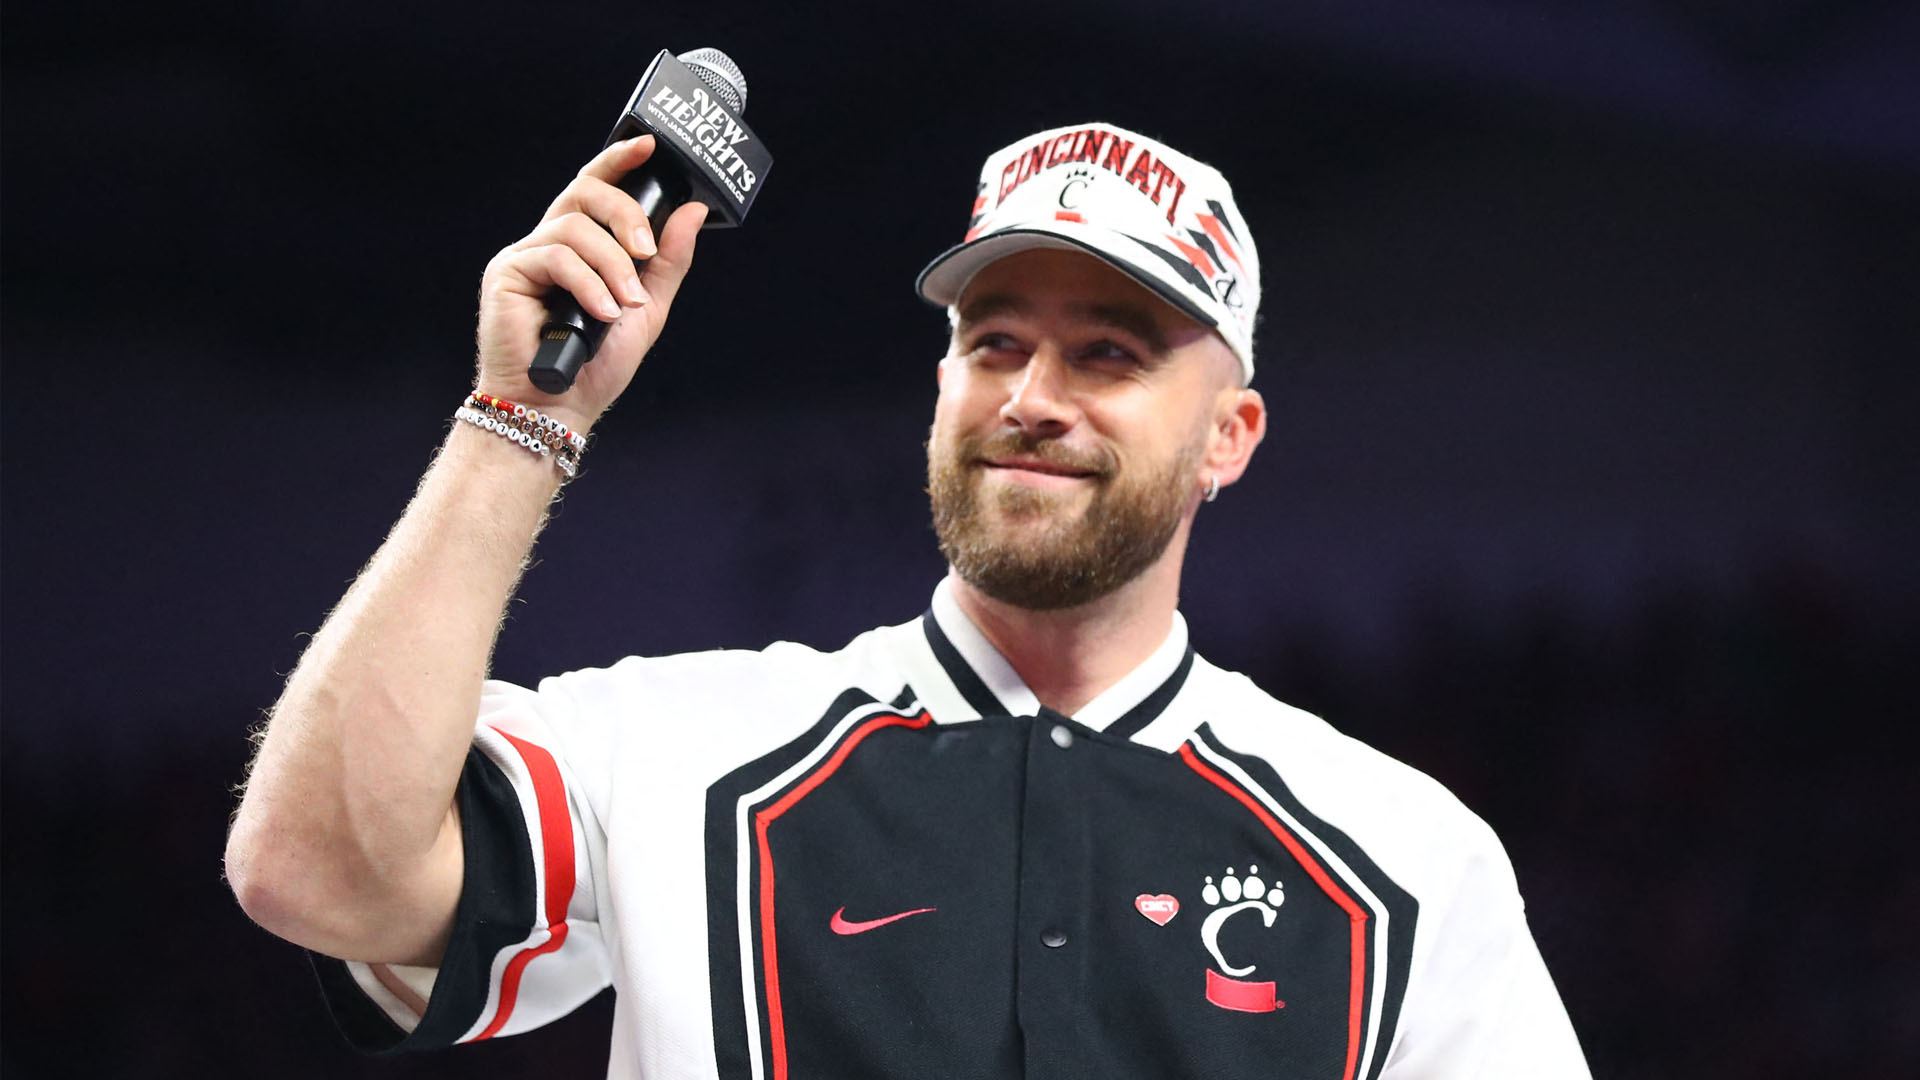 TRAVIS Kelce will be getting paid a surprisingly low amount to host a spin-off of Are You Smarter Than a Fifth Grader? as the contract was signed before he became an A-lister, sources have told The U.S. Sun.